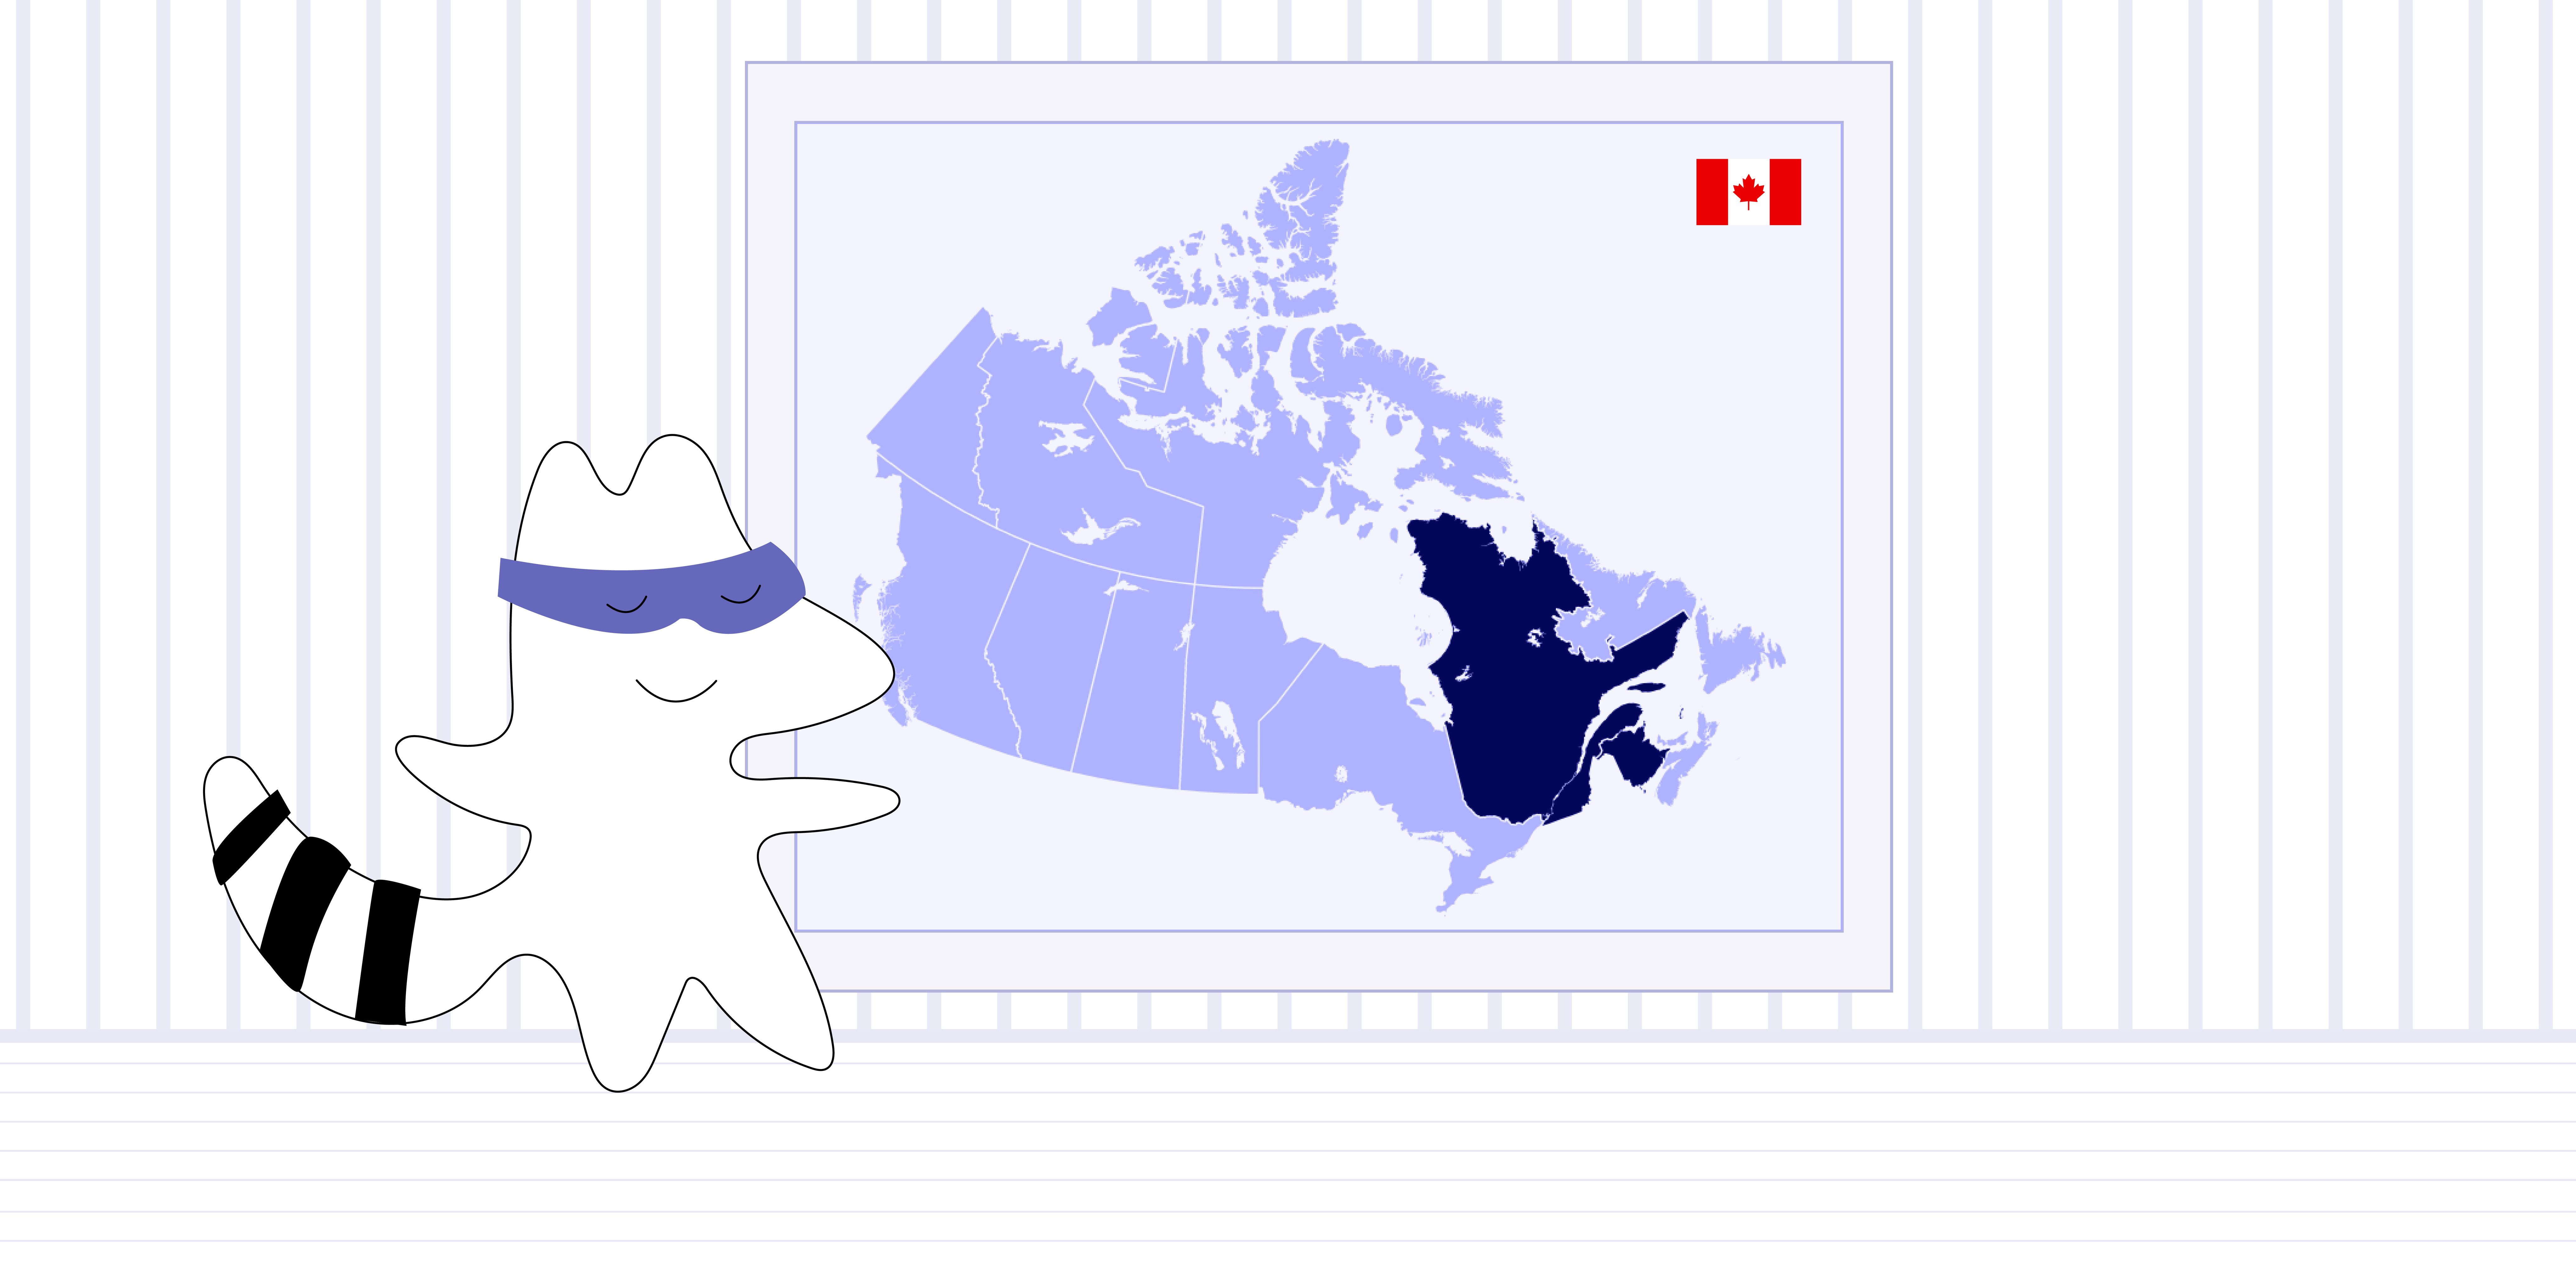 Iggy stands in front of the huge map of Canada with French-speaking regions highlighted